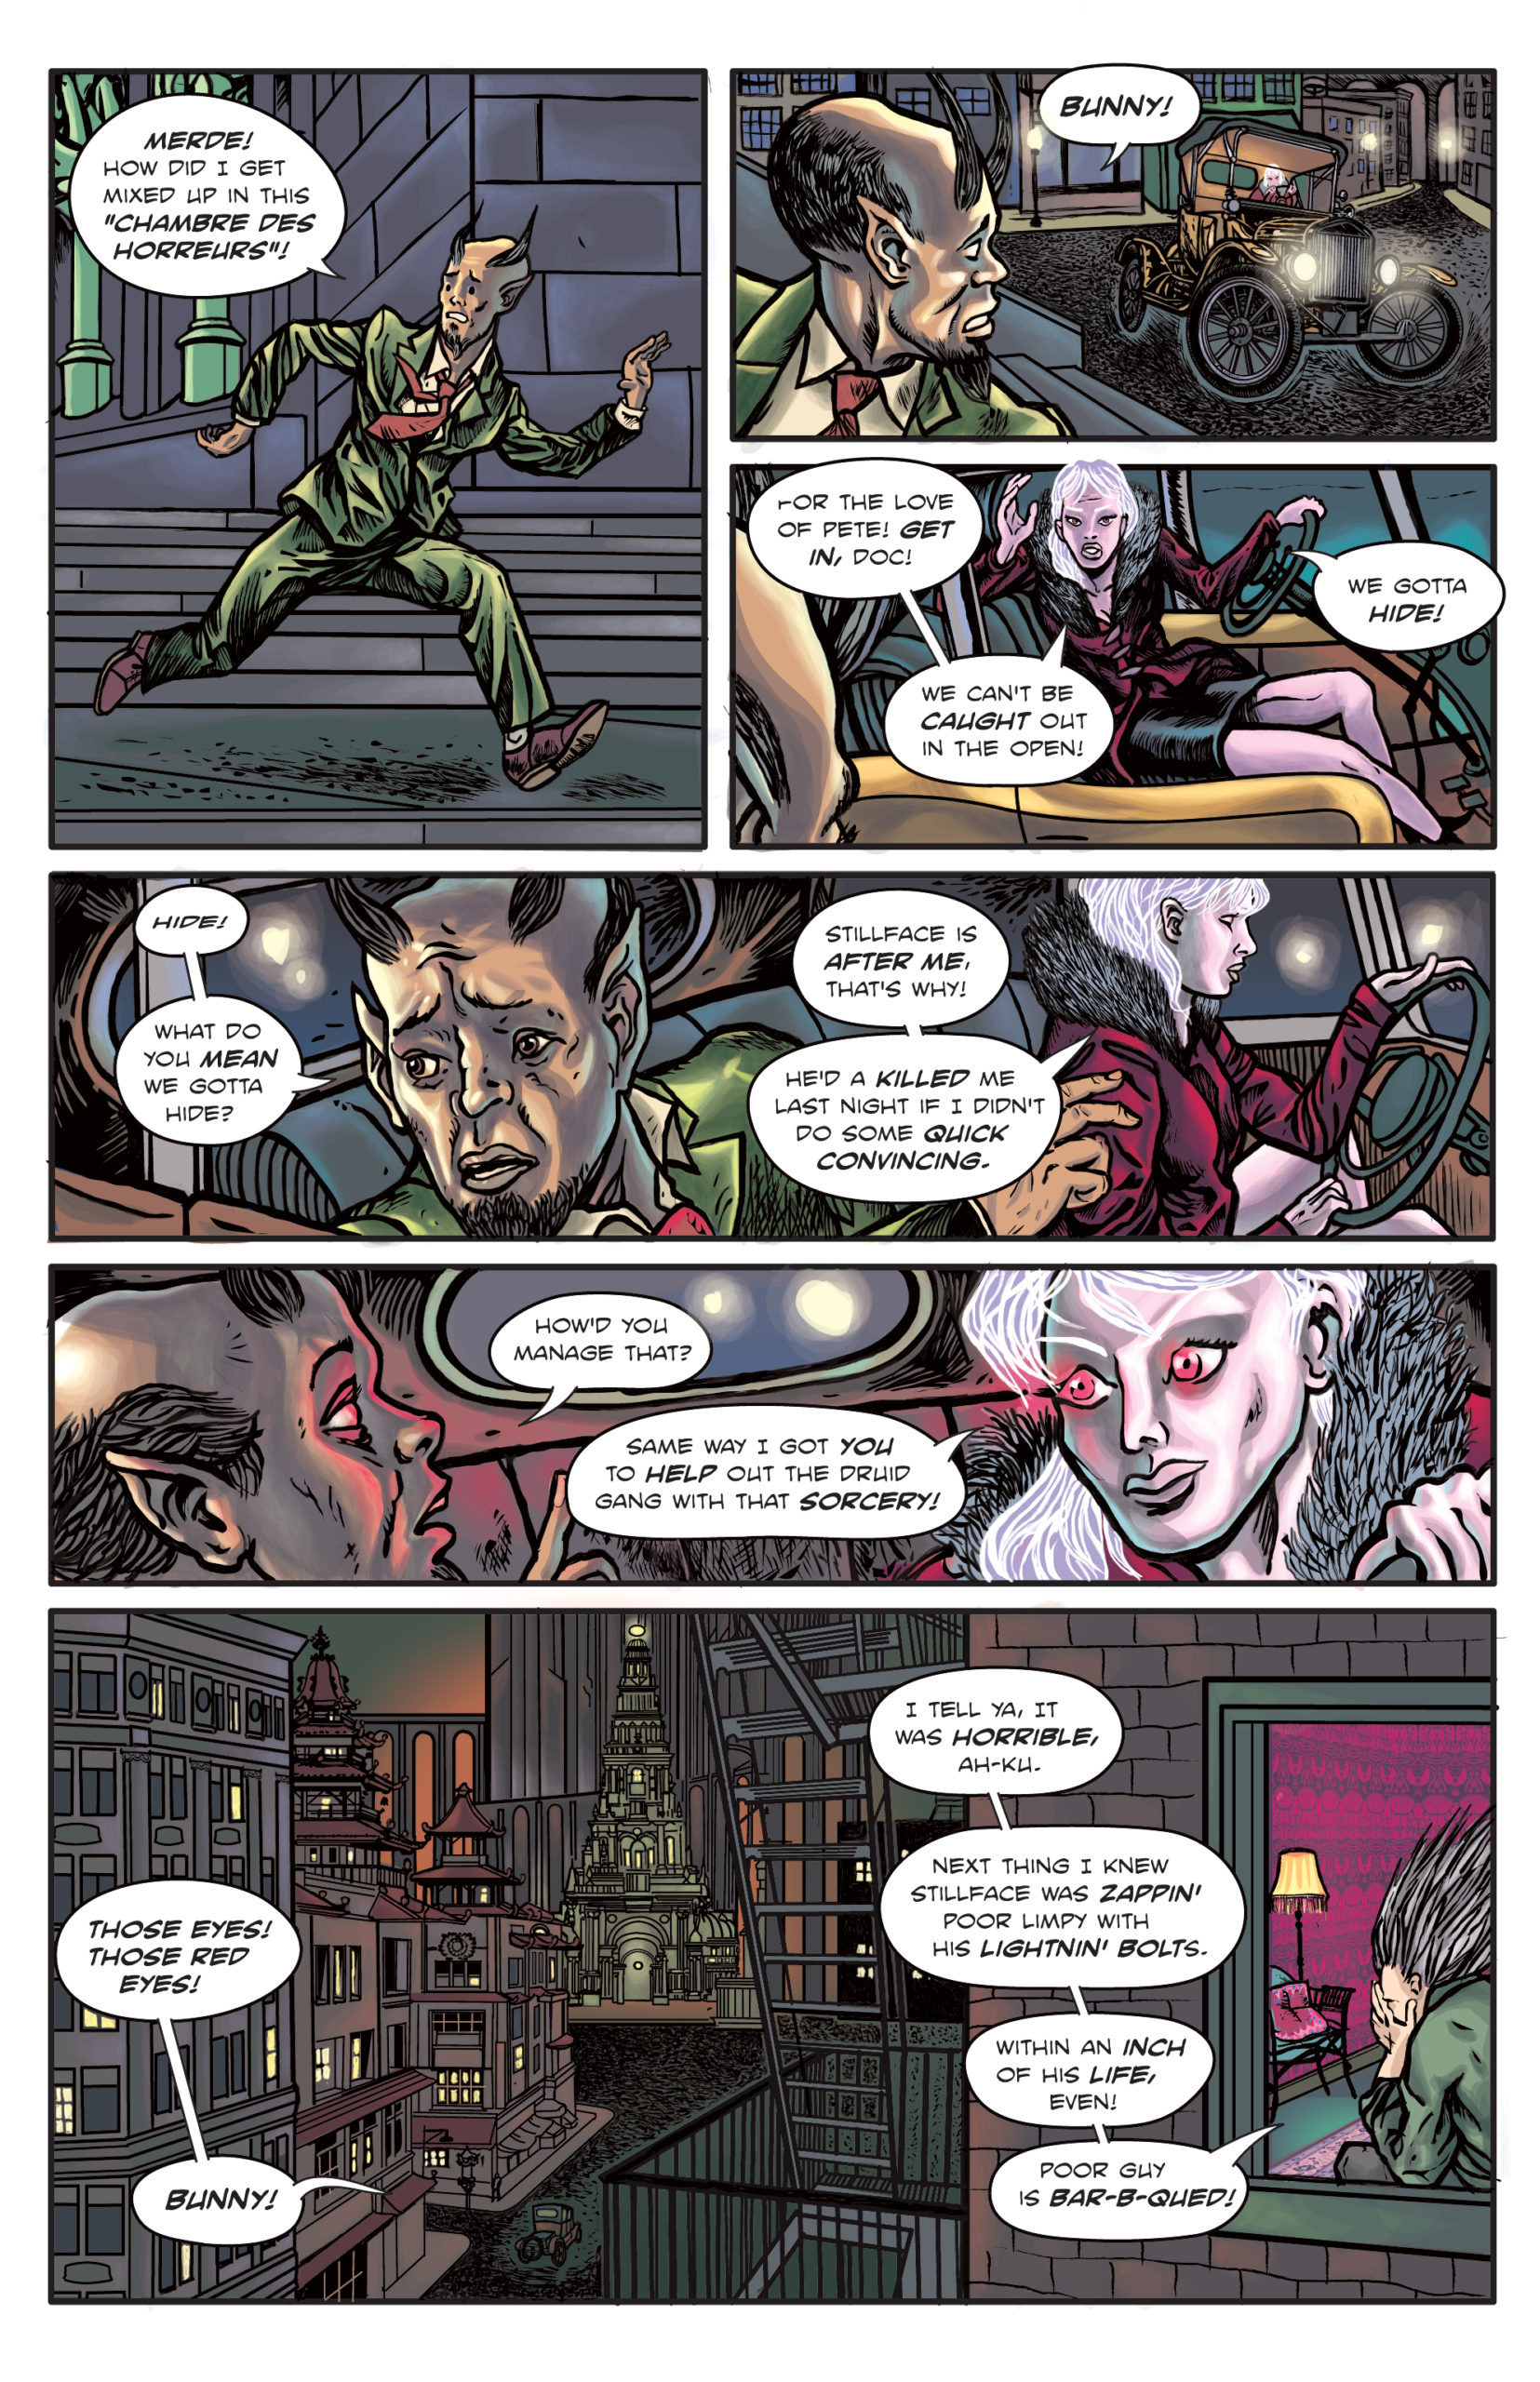 The Enchanted Dagger #6 – Page 14/21